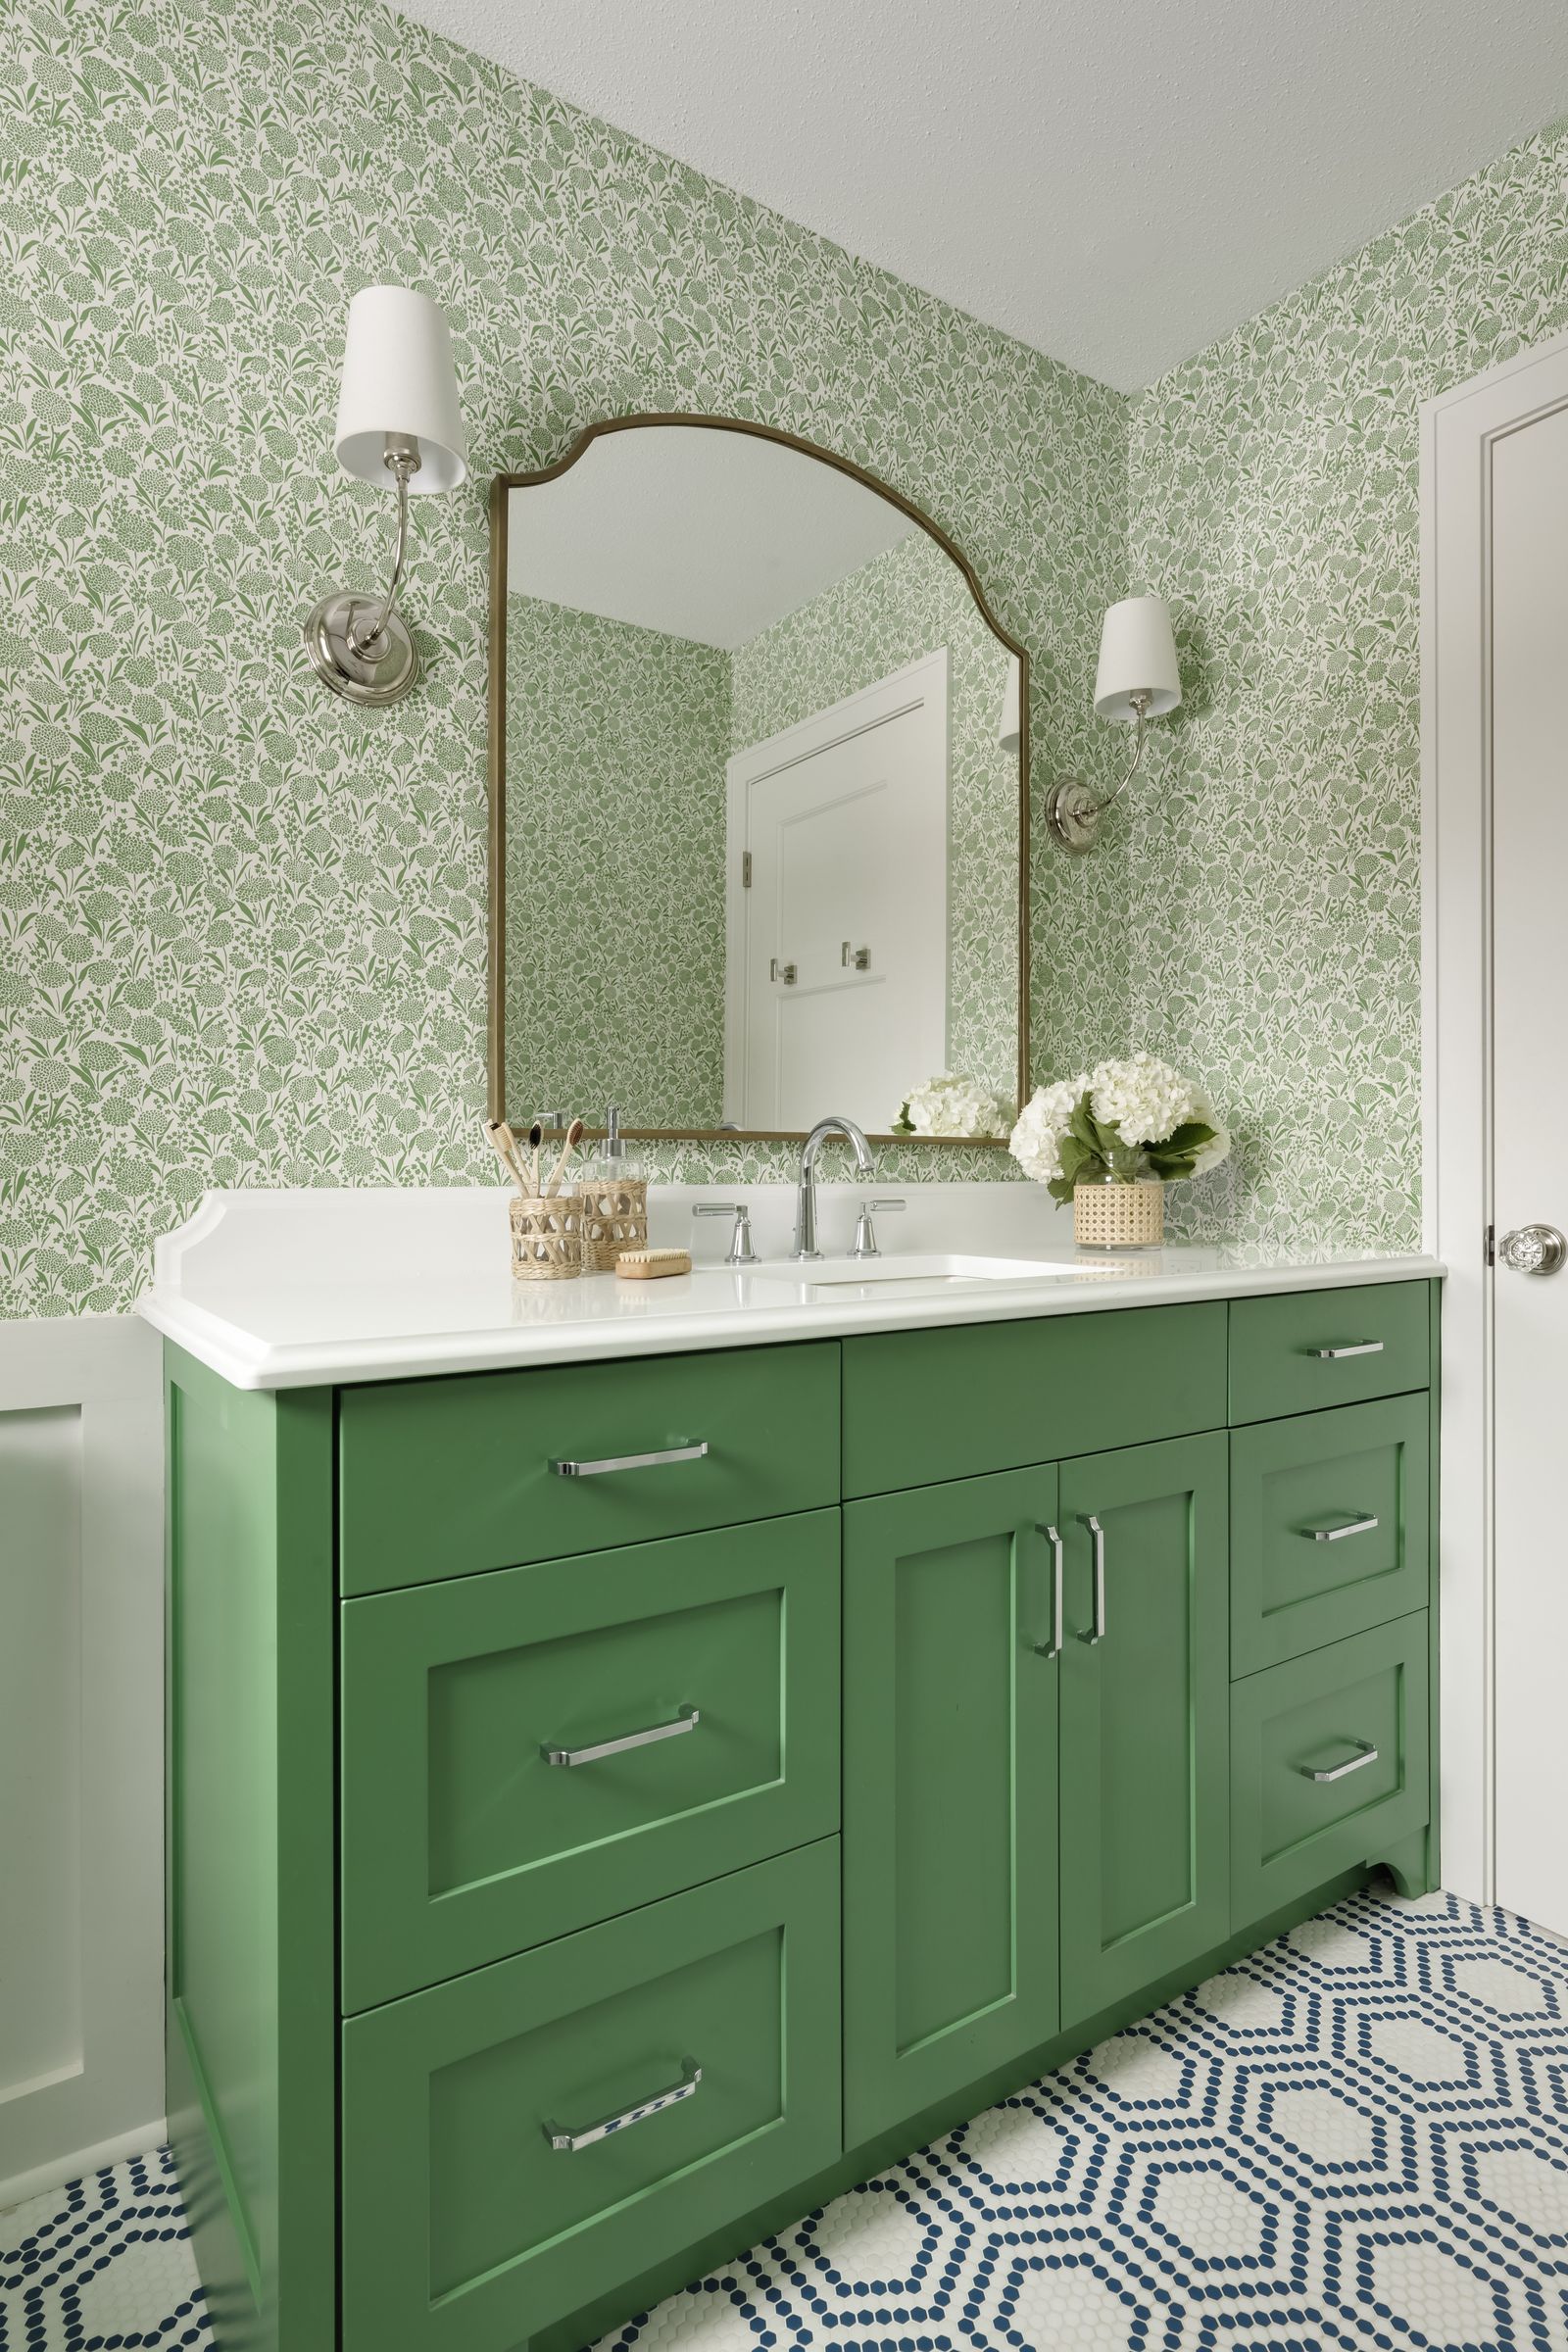 What are the best bathroom color combinations? 5 pairings to try